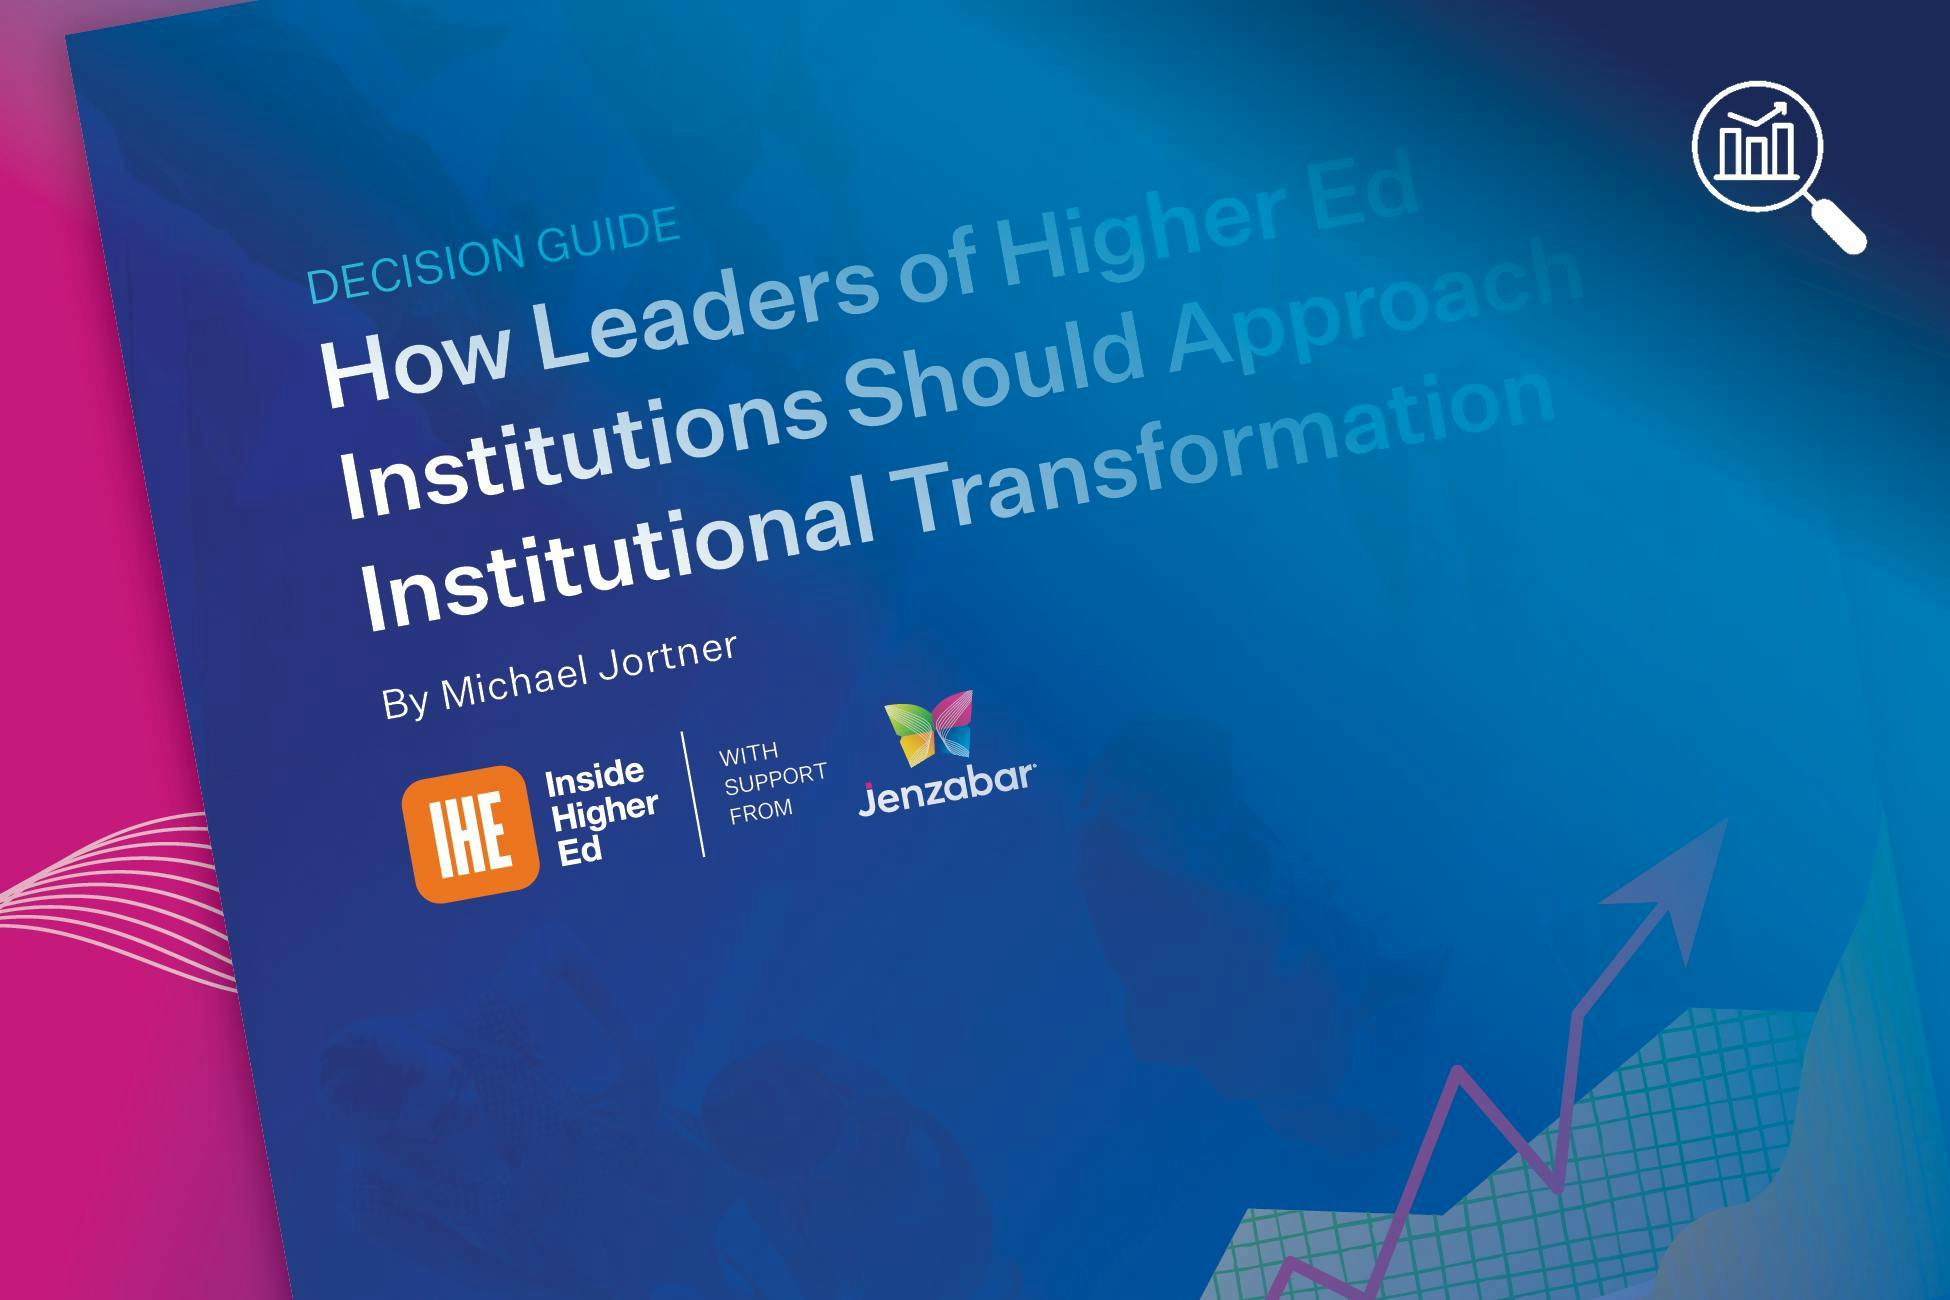 Industry Insight: How Leaders of Higher Ed Institutions Should Approach Institutional Transformation